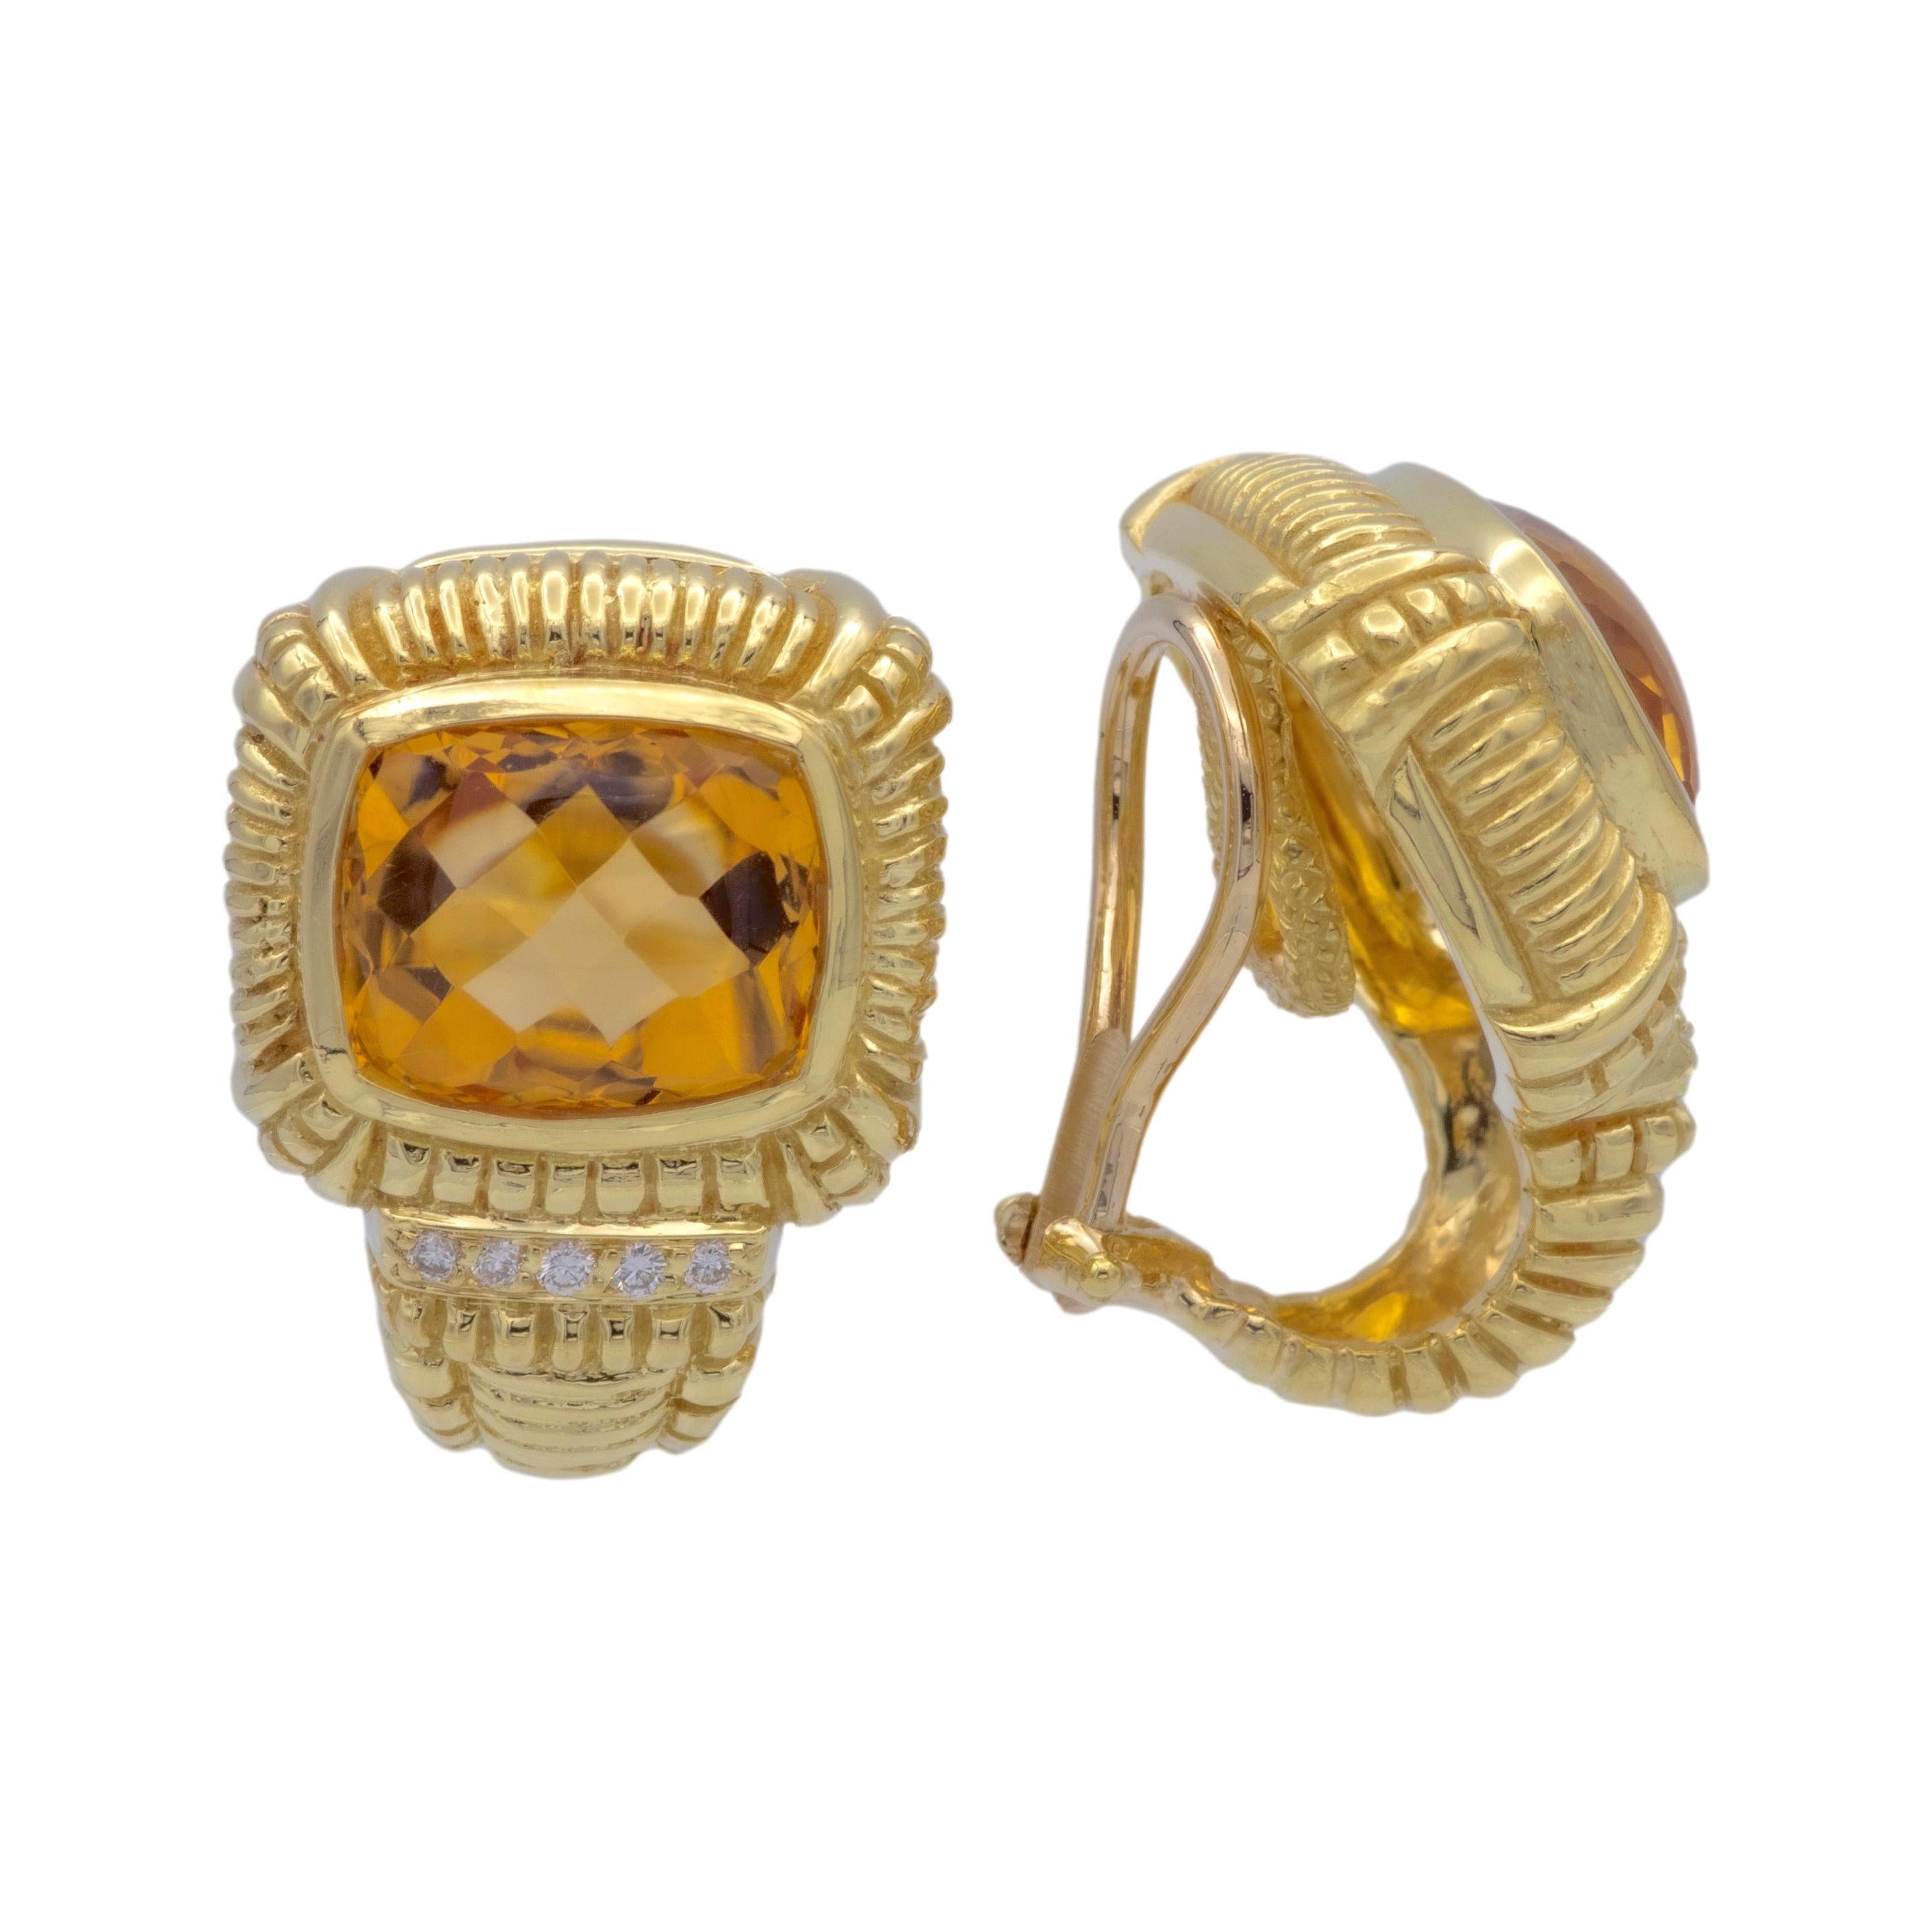 Pair of 18K Yellow Gold clip earrings finely crafted in 18 karat yellow gold featuring two elongated cushion shape center citrine gemstones set inside bezel frames surrounded by ribbed edges accented by 10 round brilliant cut diamonds. weighing 0.08